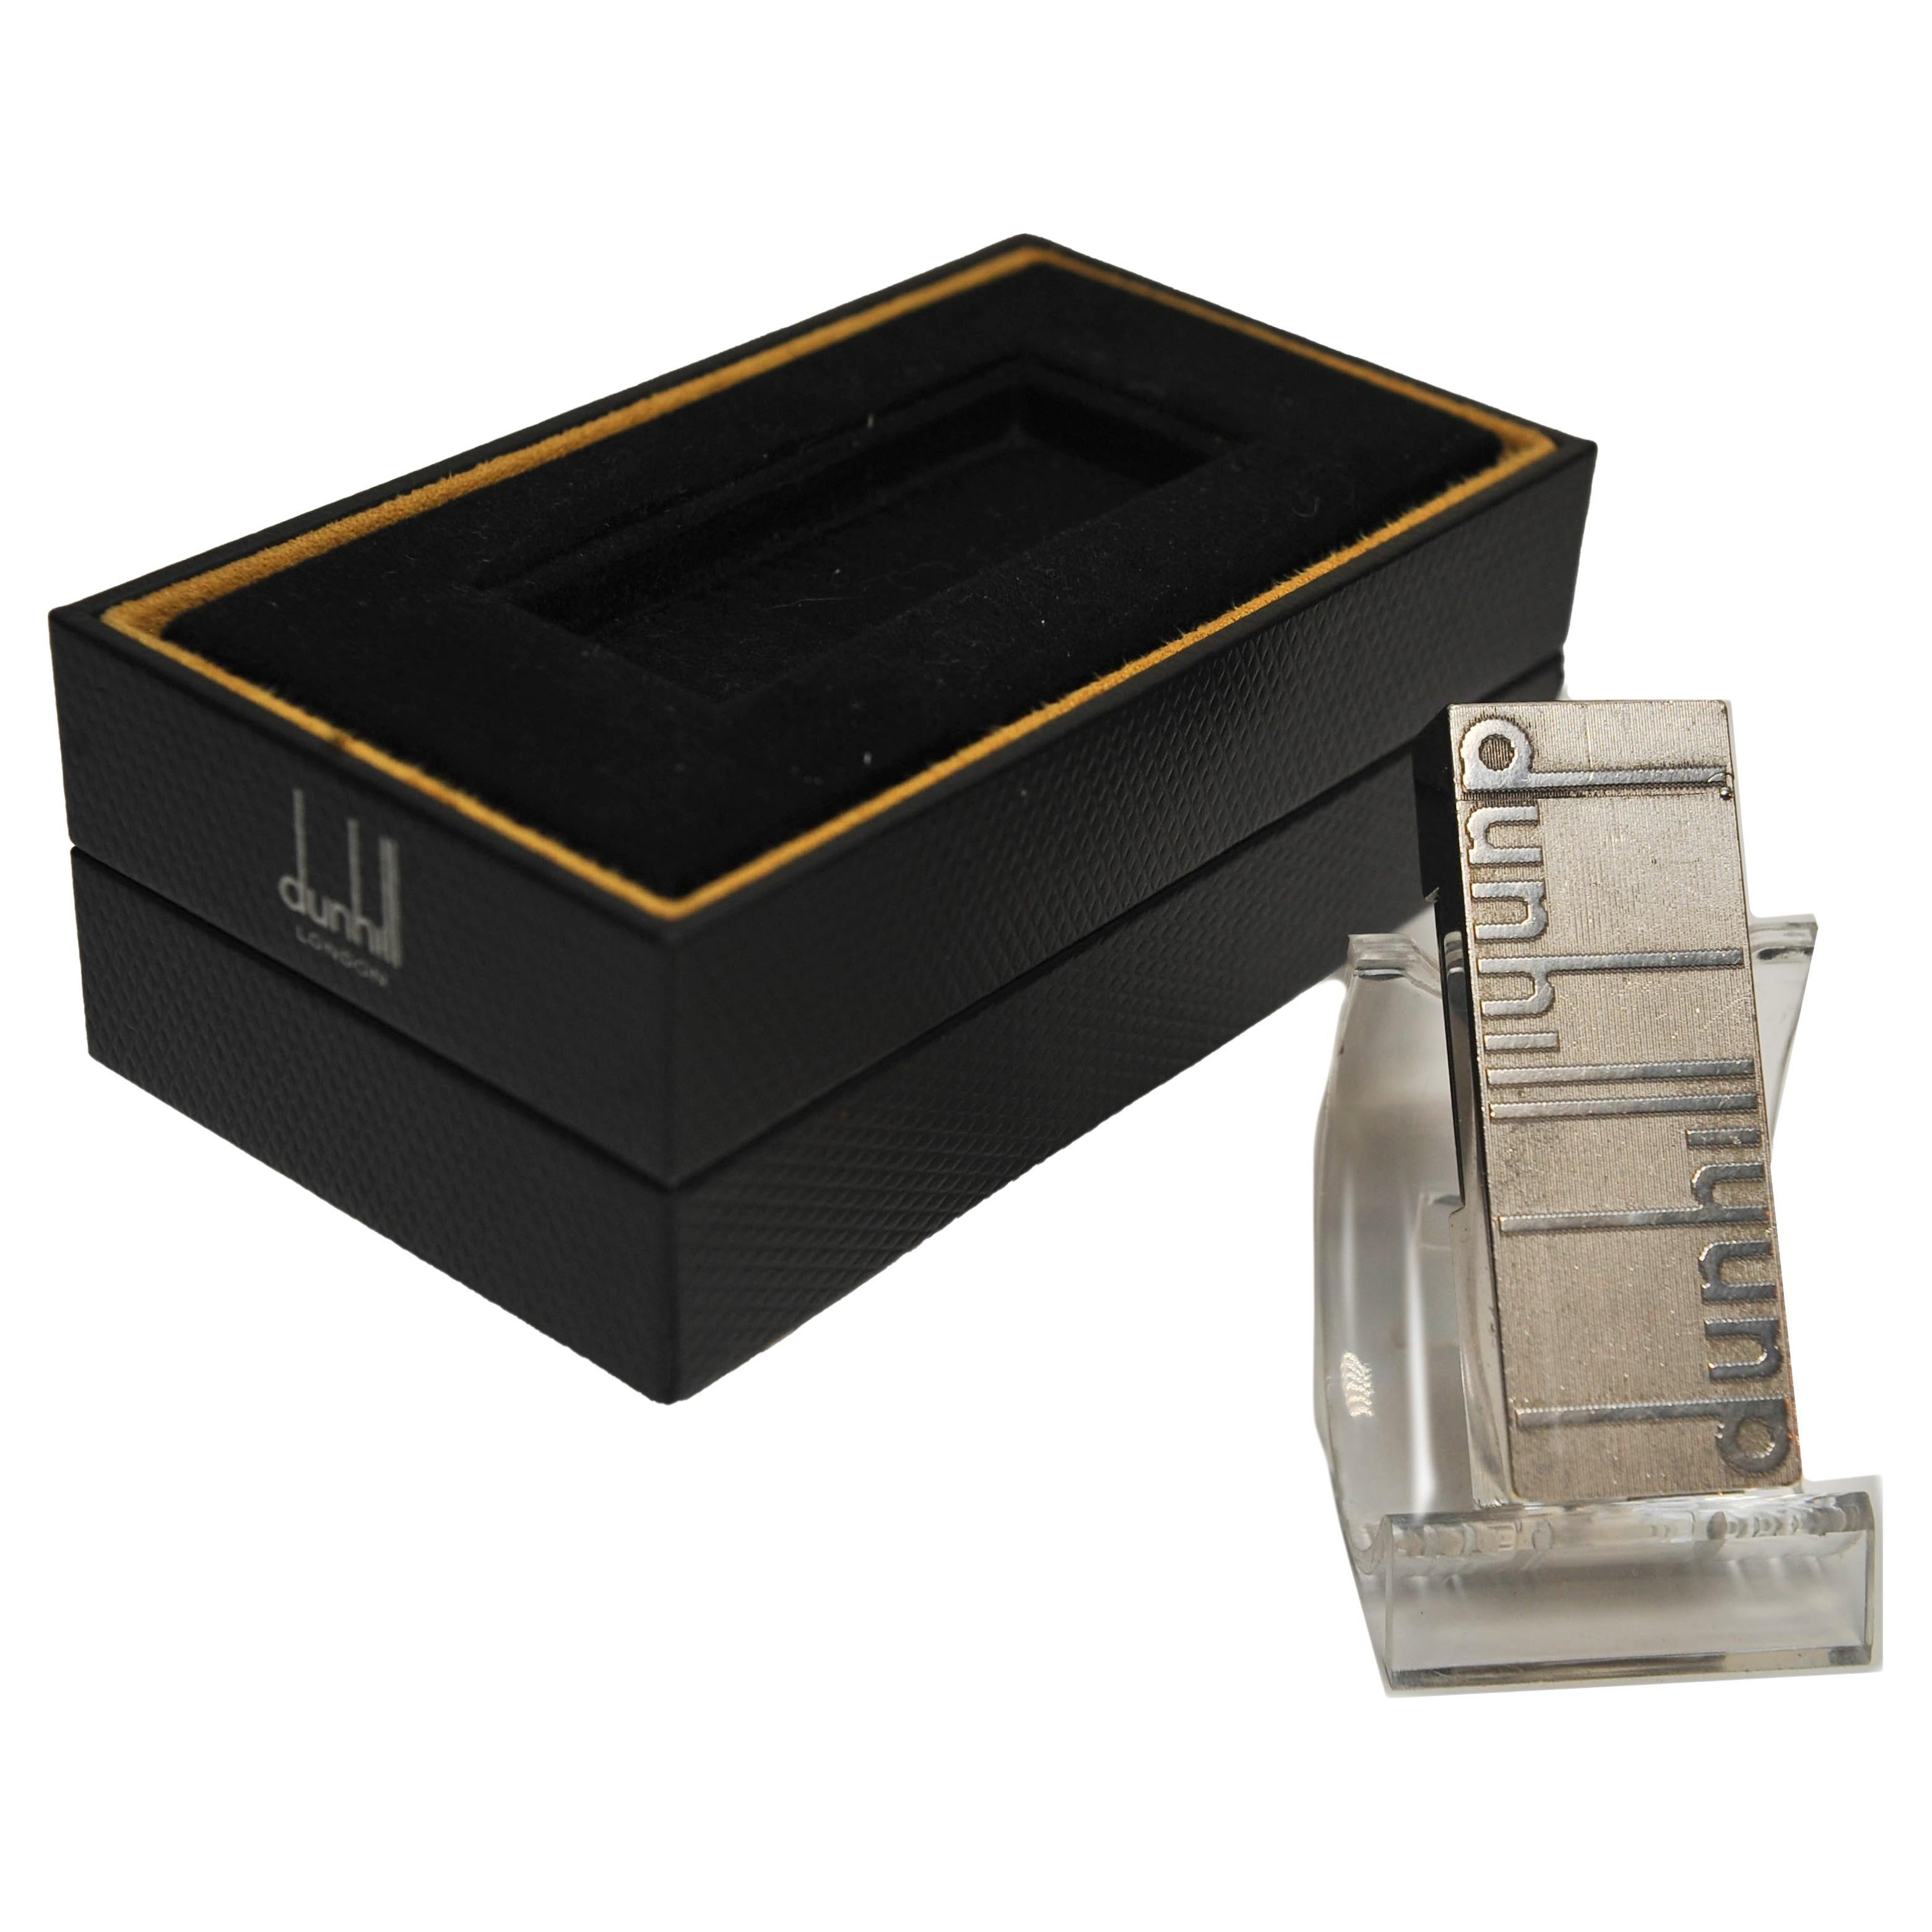 Dunhill of London Longtail Logo Rollgas Cigarette Lighter With Dunhill Box